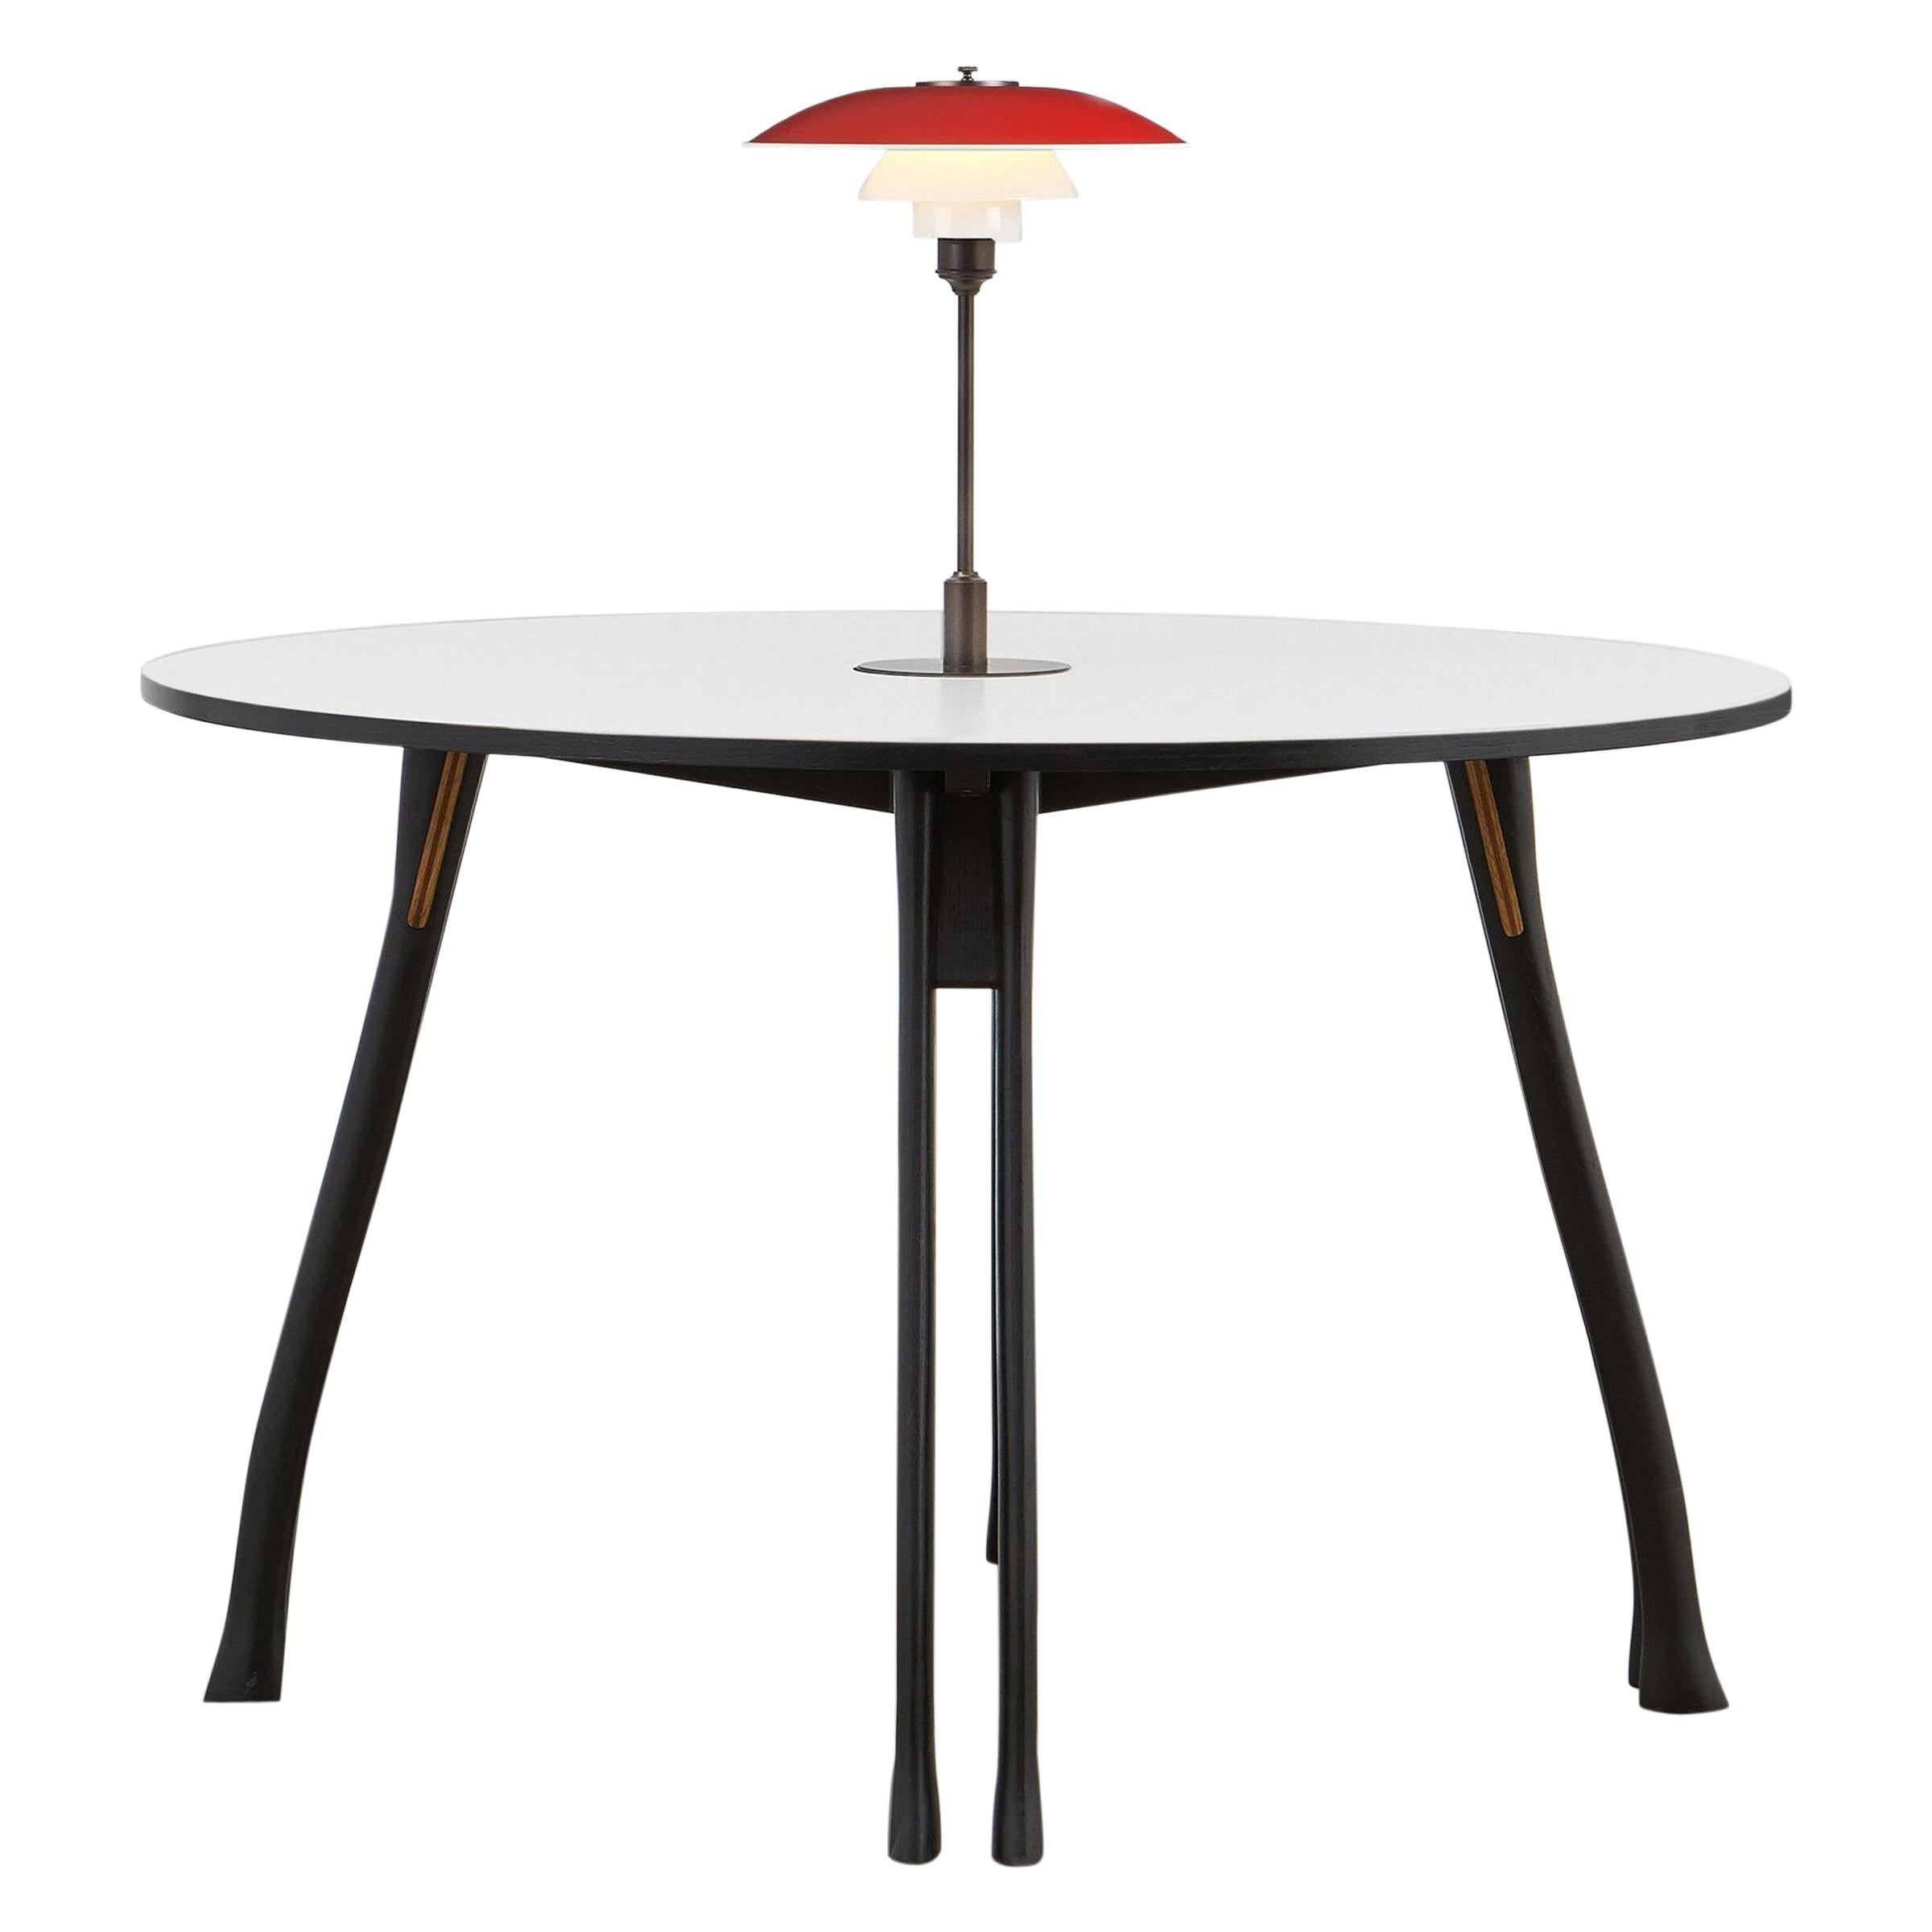 PH Axe Table, Black Oak Legs, Laminated Plate, Red PH 3 ½-2 ½ Lamp For Sale